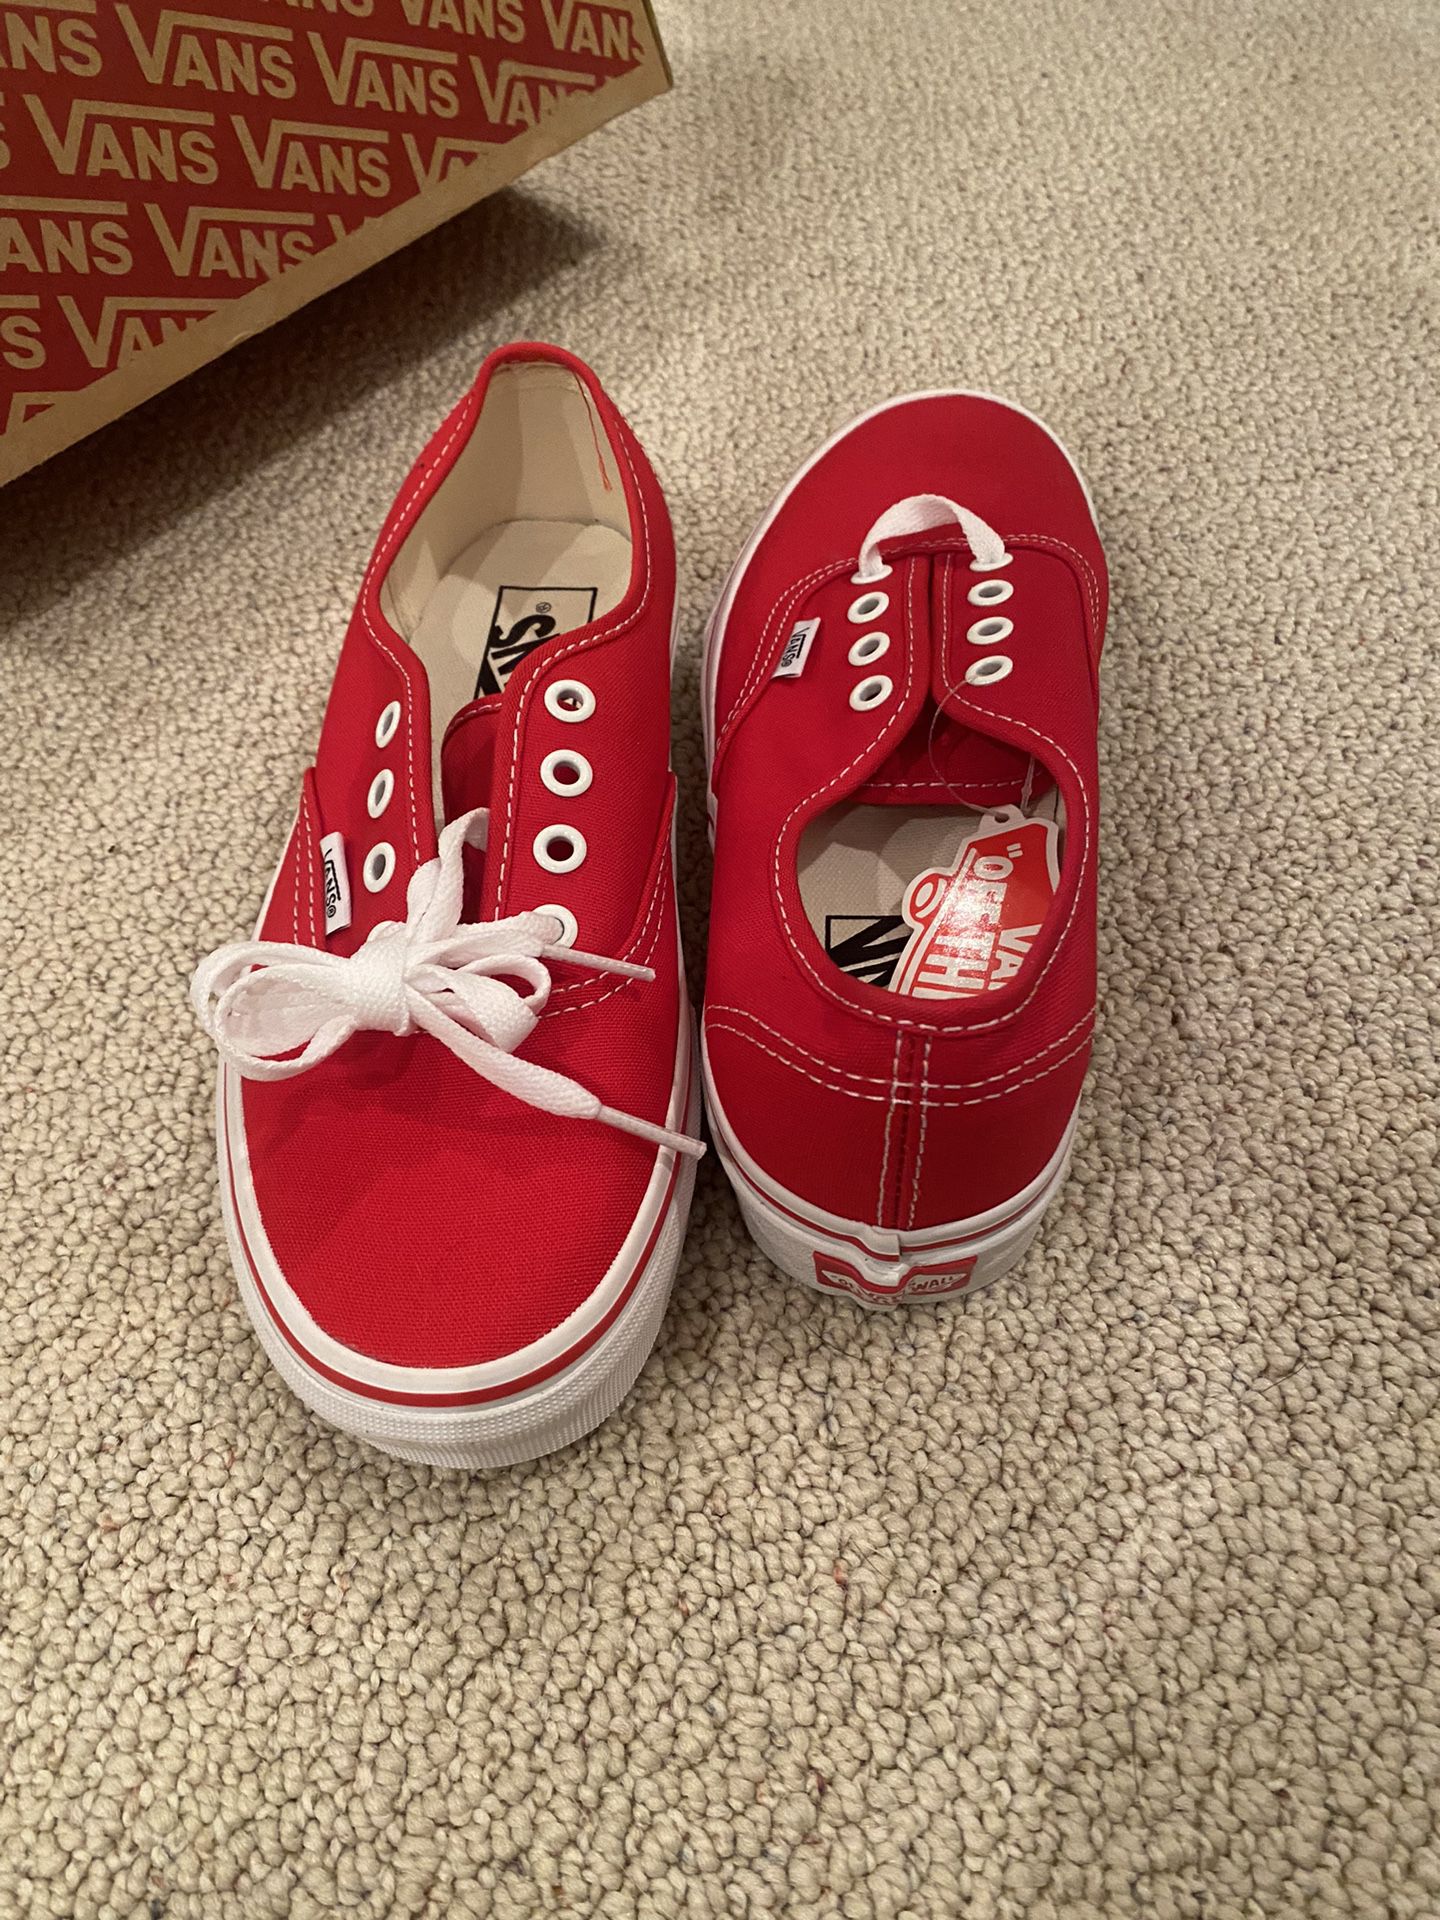 New Red Vans tennis shoes